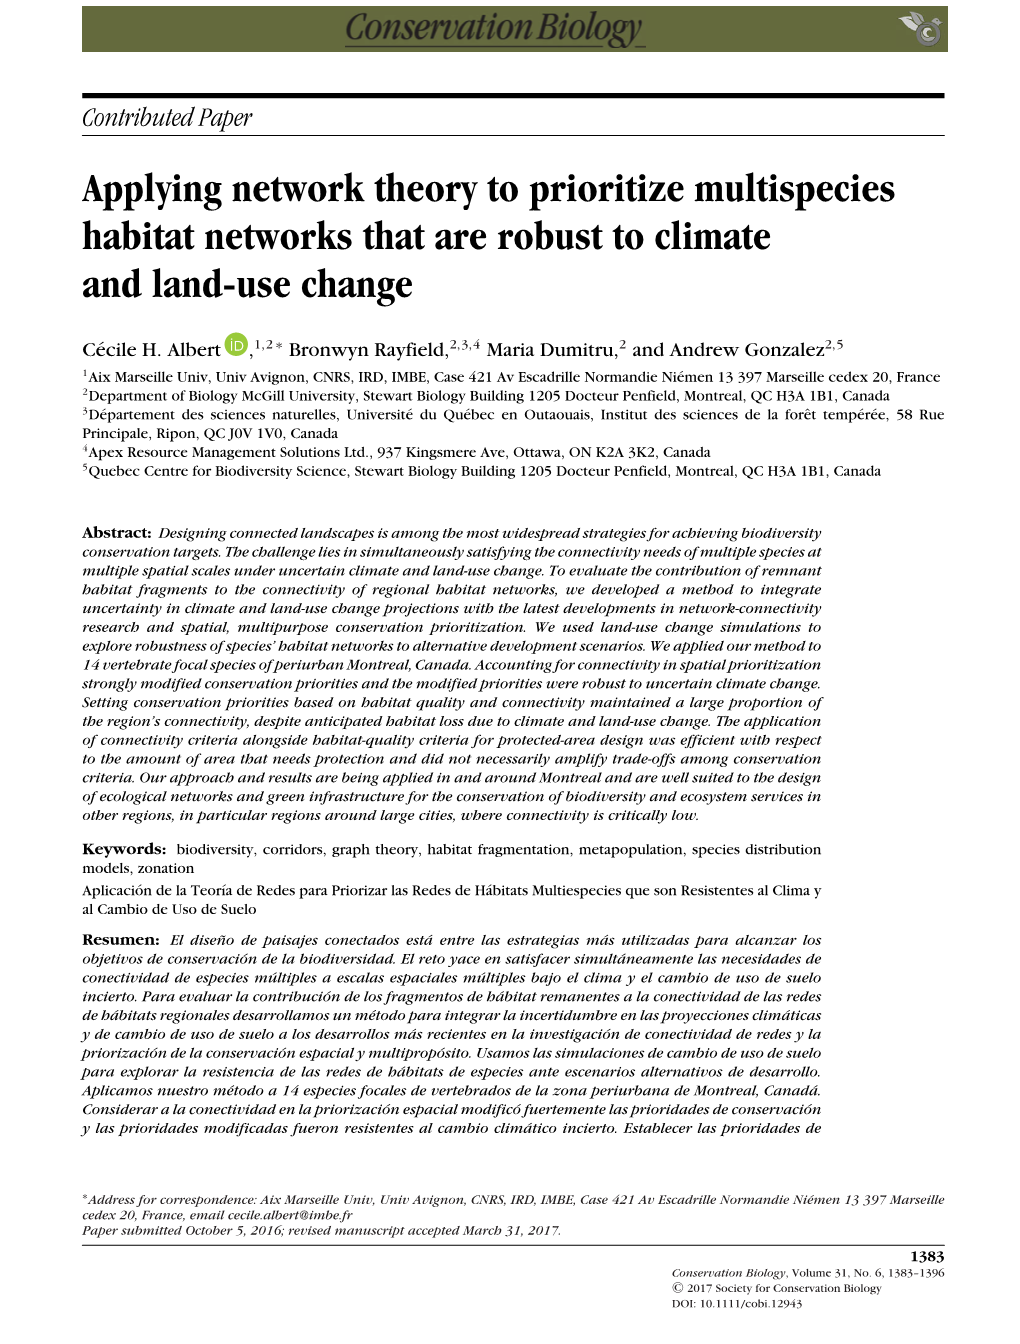 Applying Network Theory to Prioritize Multispecies Habitat Networks That Are Robust to Climate and Land-Use Change